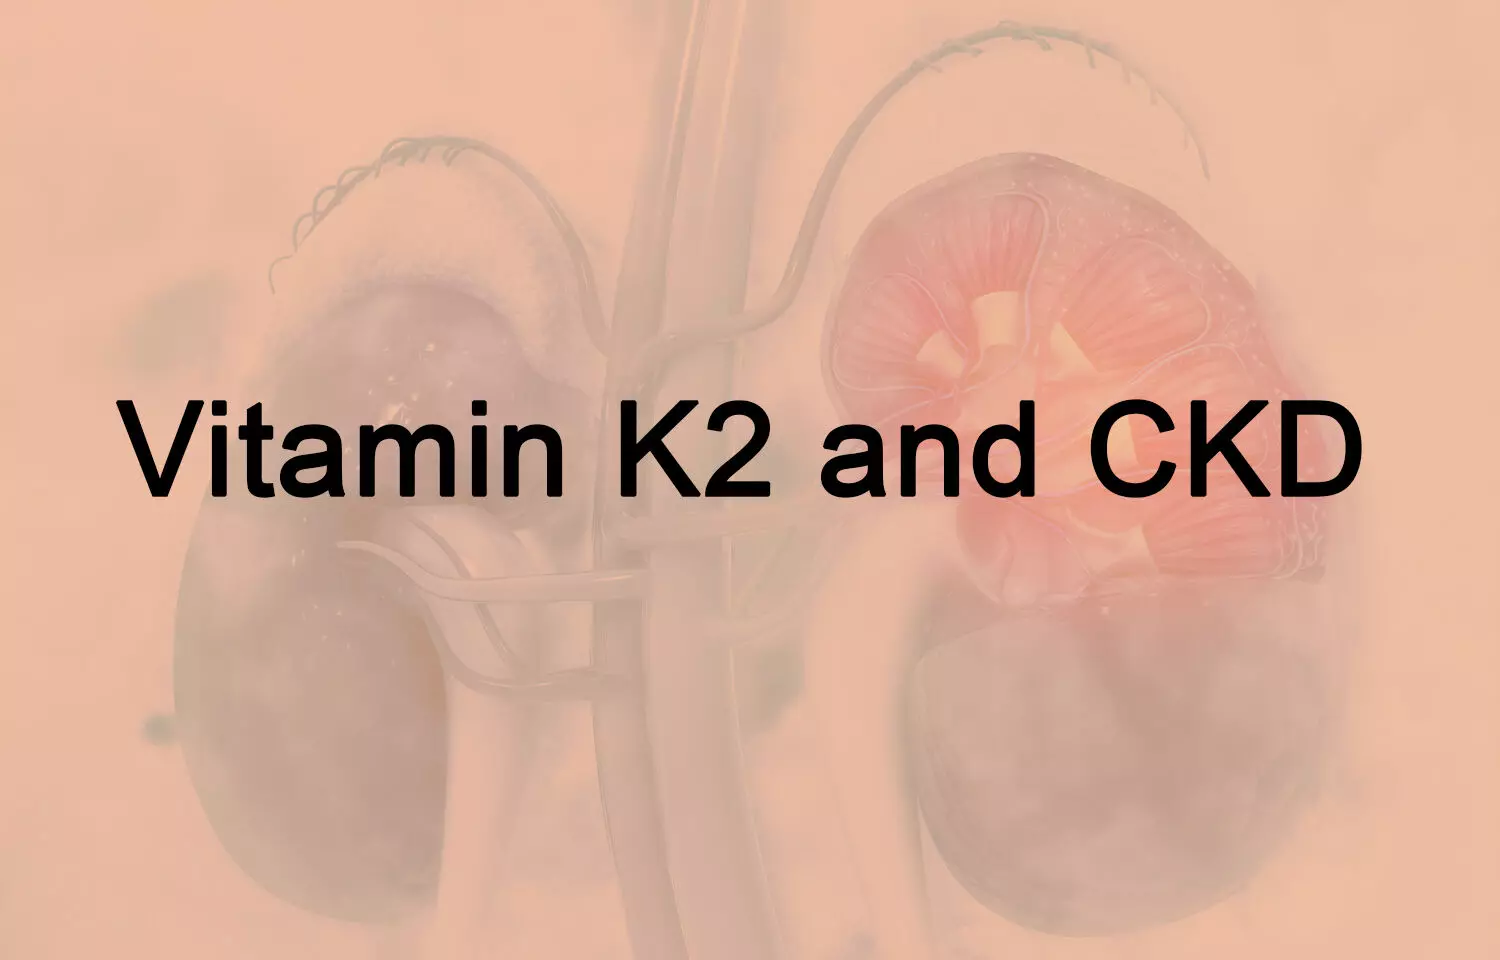 Role of vitamin K in controlling atherosclerosis and vascular calcification in CKD patients: Review